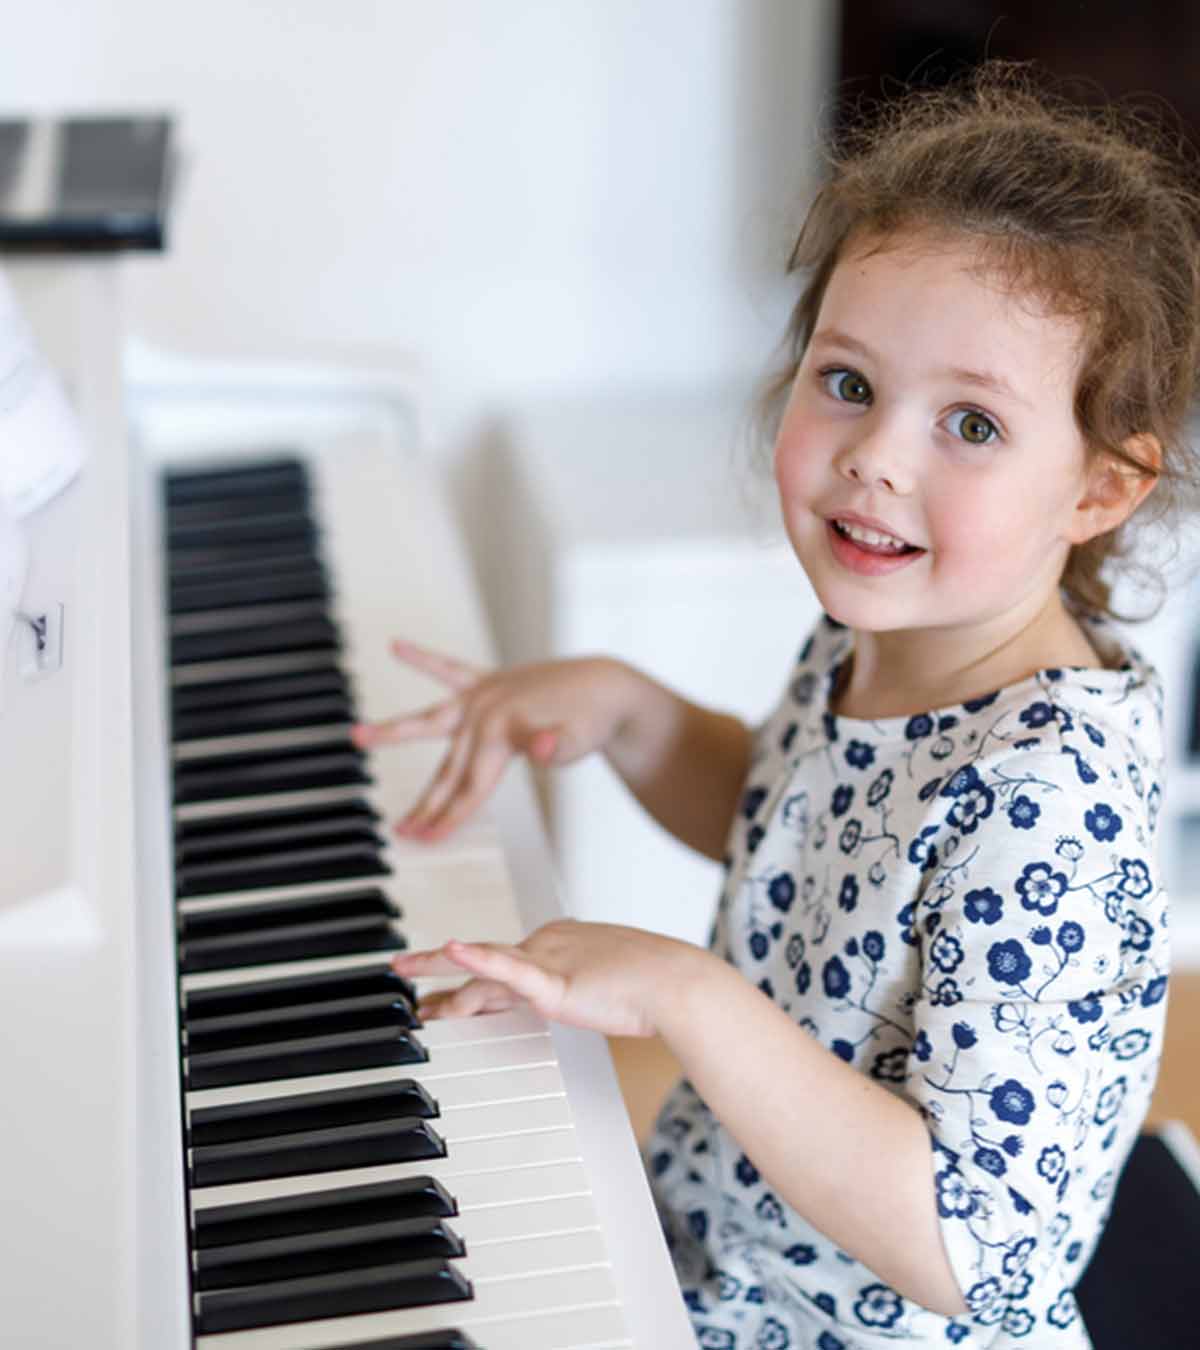 6 Tips For Learning Easy Piano Songs for Kids